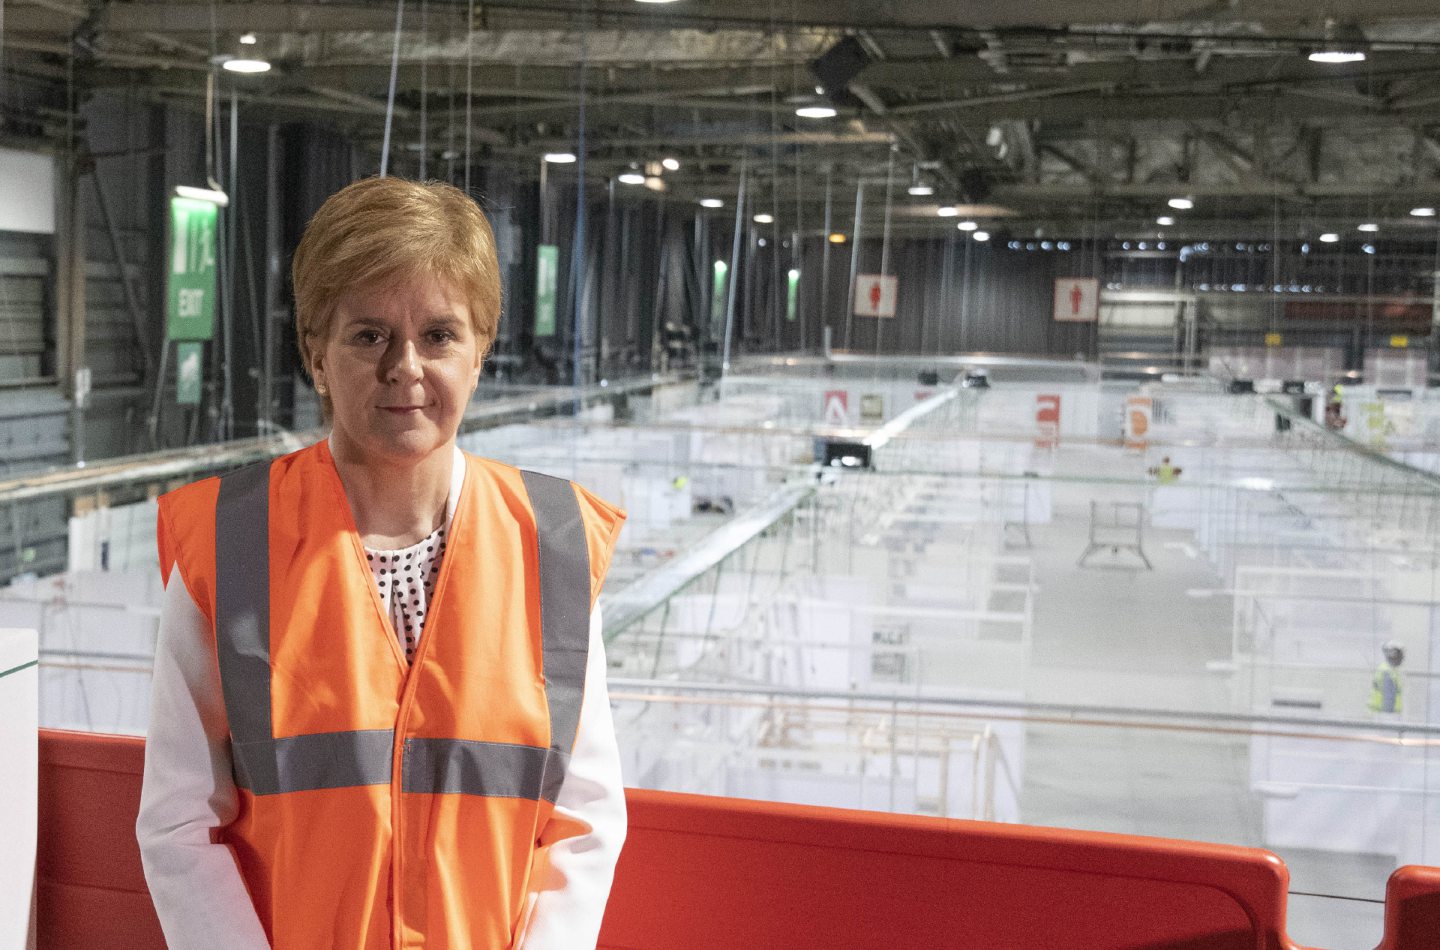 First Minister Nicola Sturgeon during a visit to the NHS Louisa Jordan Hospital, a new temporary hospital at the SEC event centre in Glasgow created to help tackle the coronavirus outbreak.